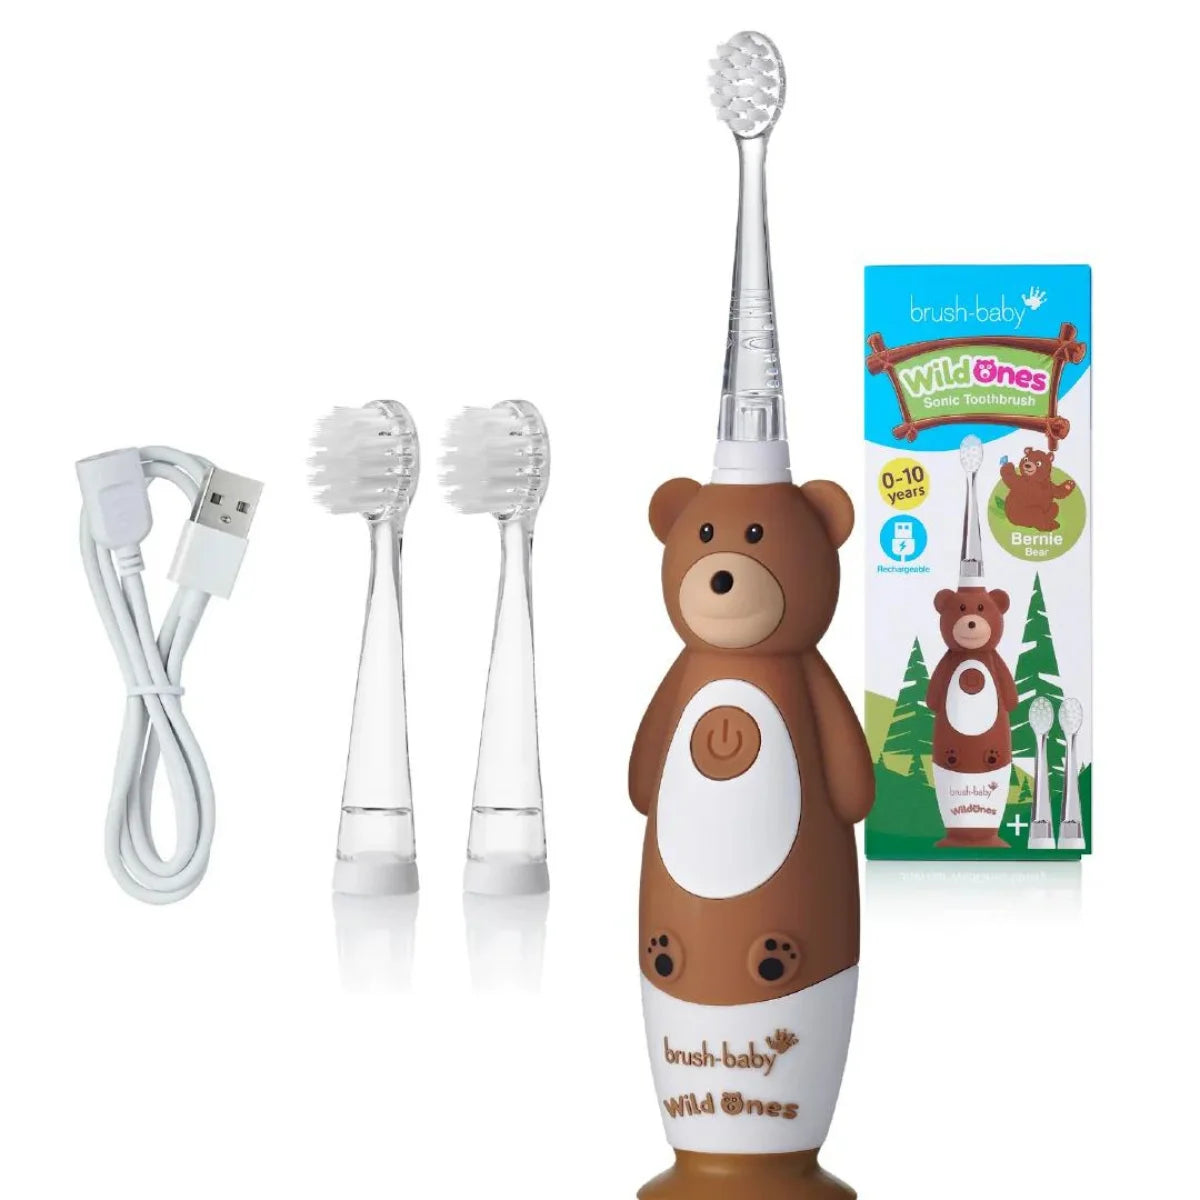 WildOnes brown and white bernie bear kids electric rechargeable toothbrush for children with box packaging and kids electric toothbrush replacement brush heads